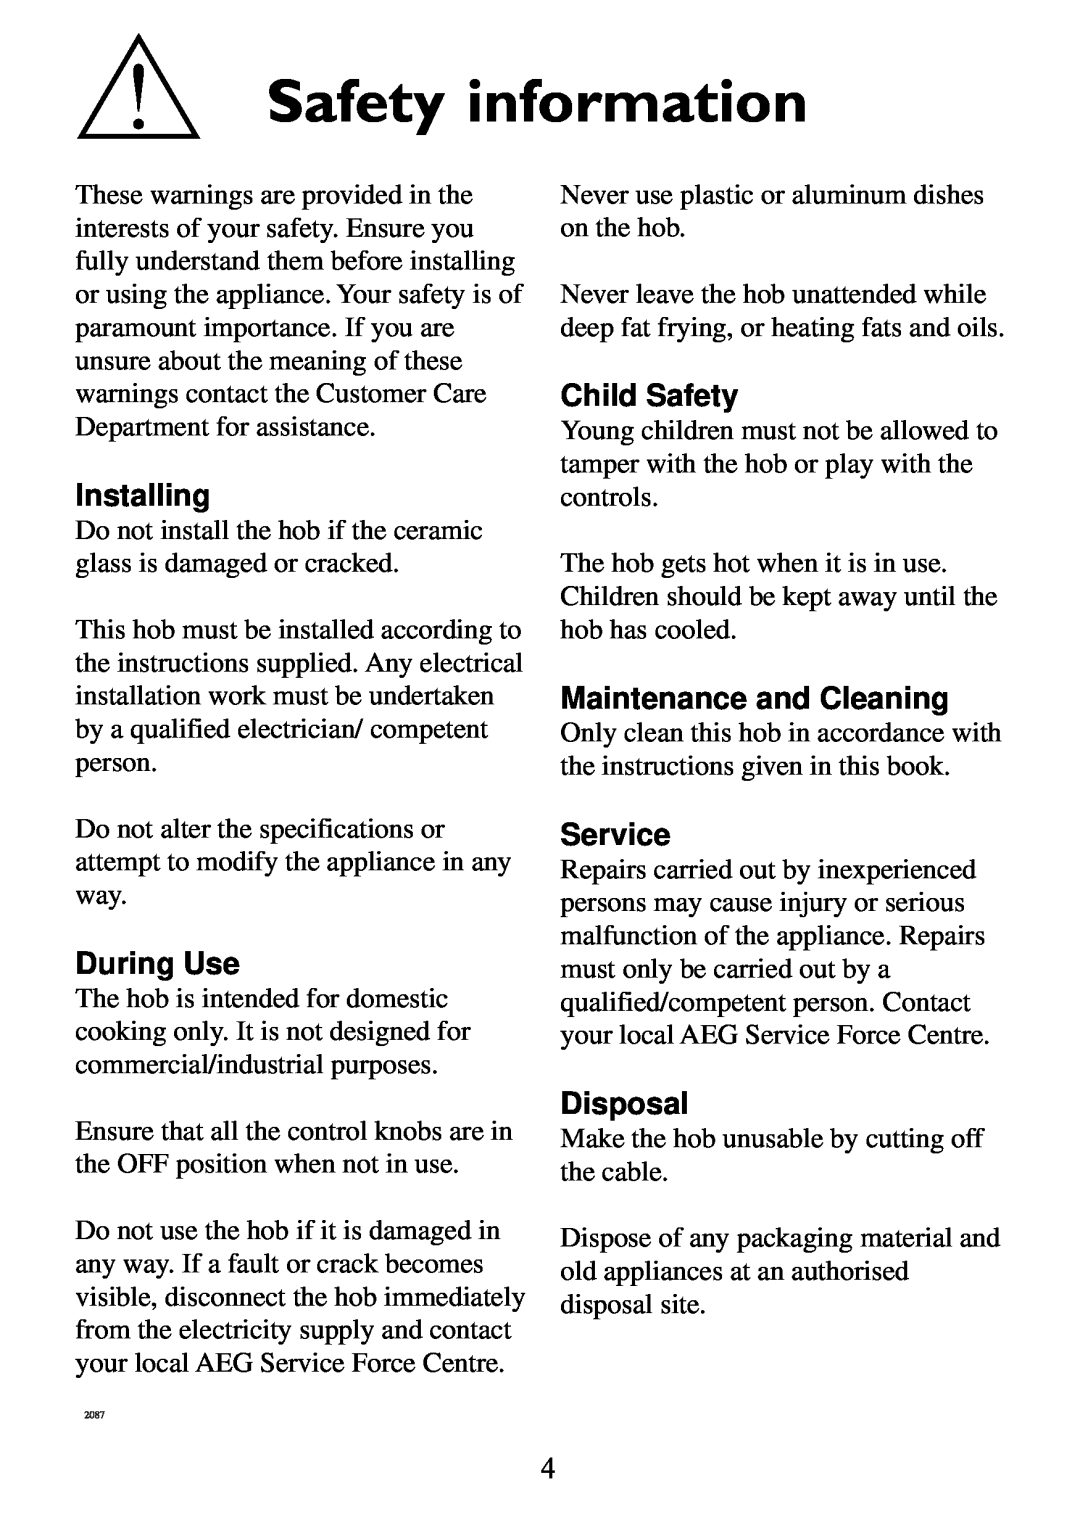 Electrolux Ceramic glass hob Safety information, Installing, During Use, Child Safety, Maintenance and Cleaning, Service 